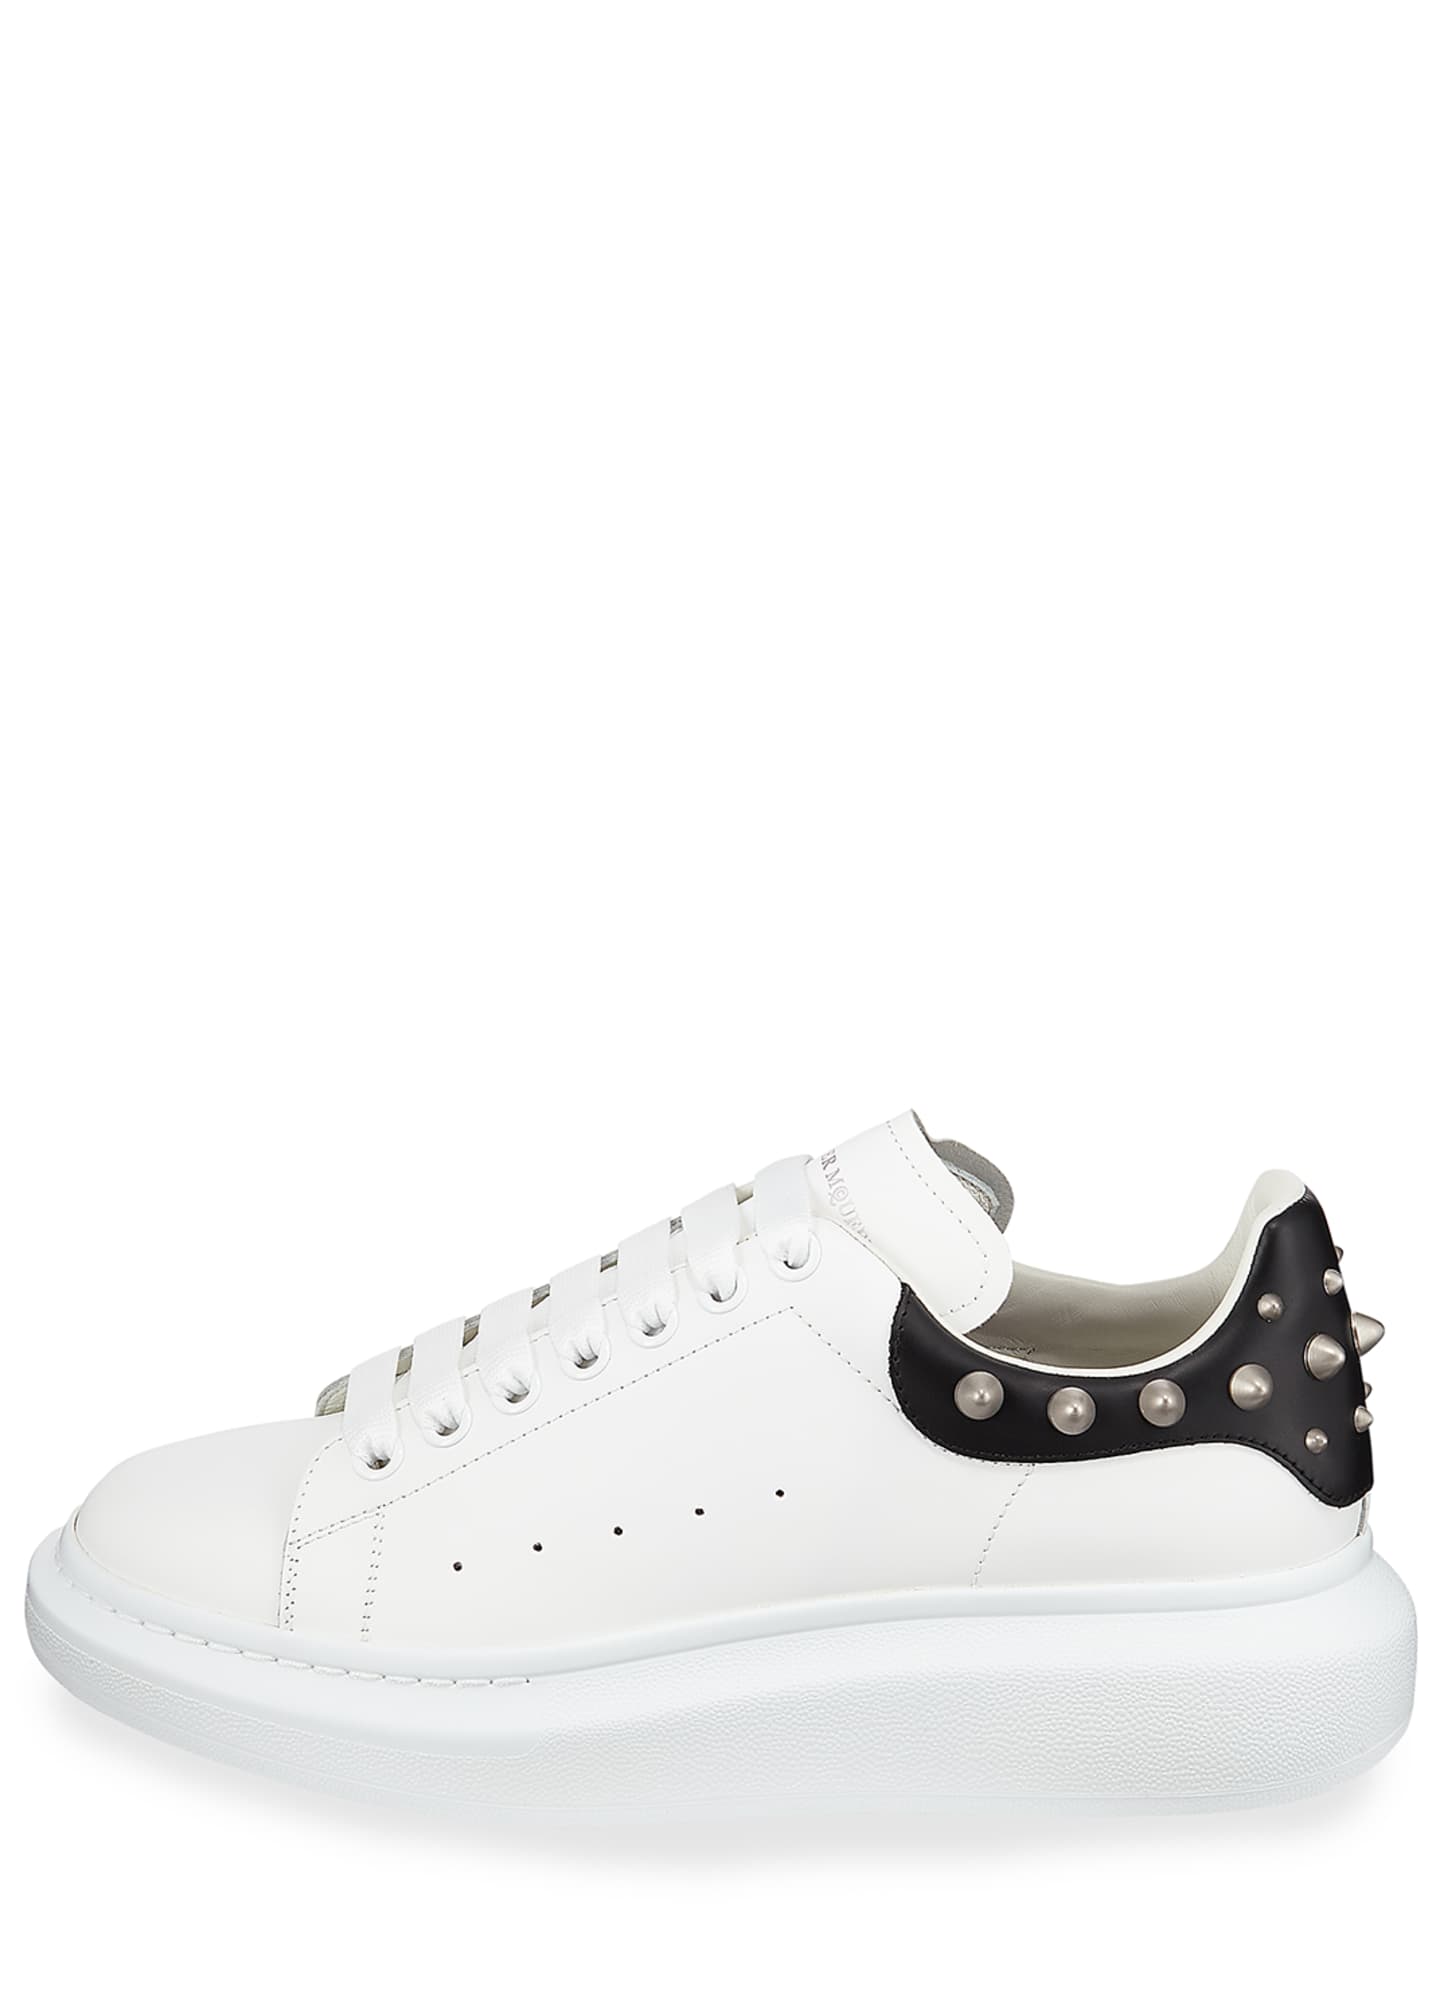 Alexander McQueen Men's Larry Leather Lace-Up Platform Sneakers with ...